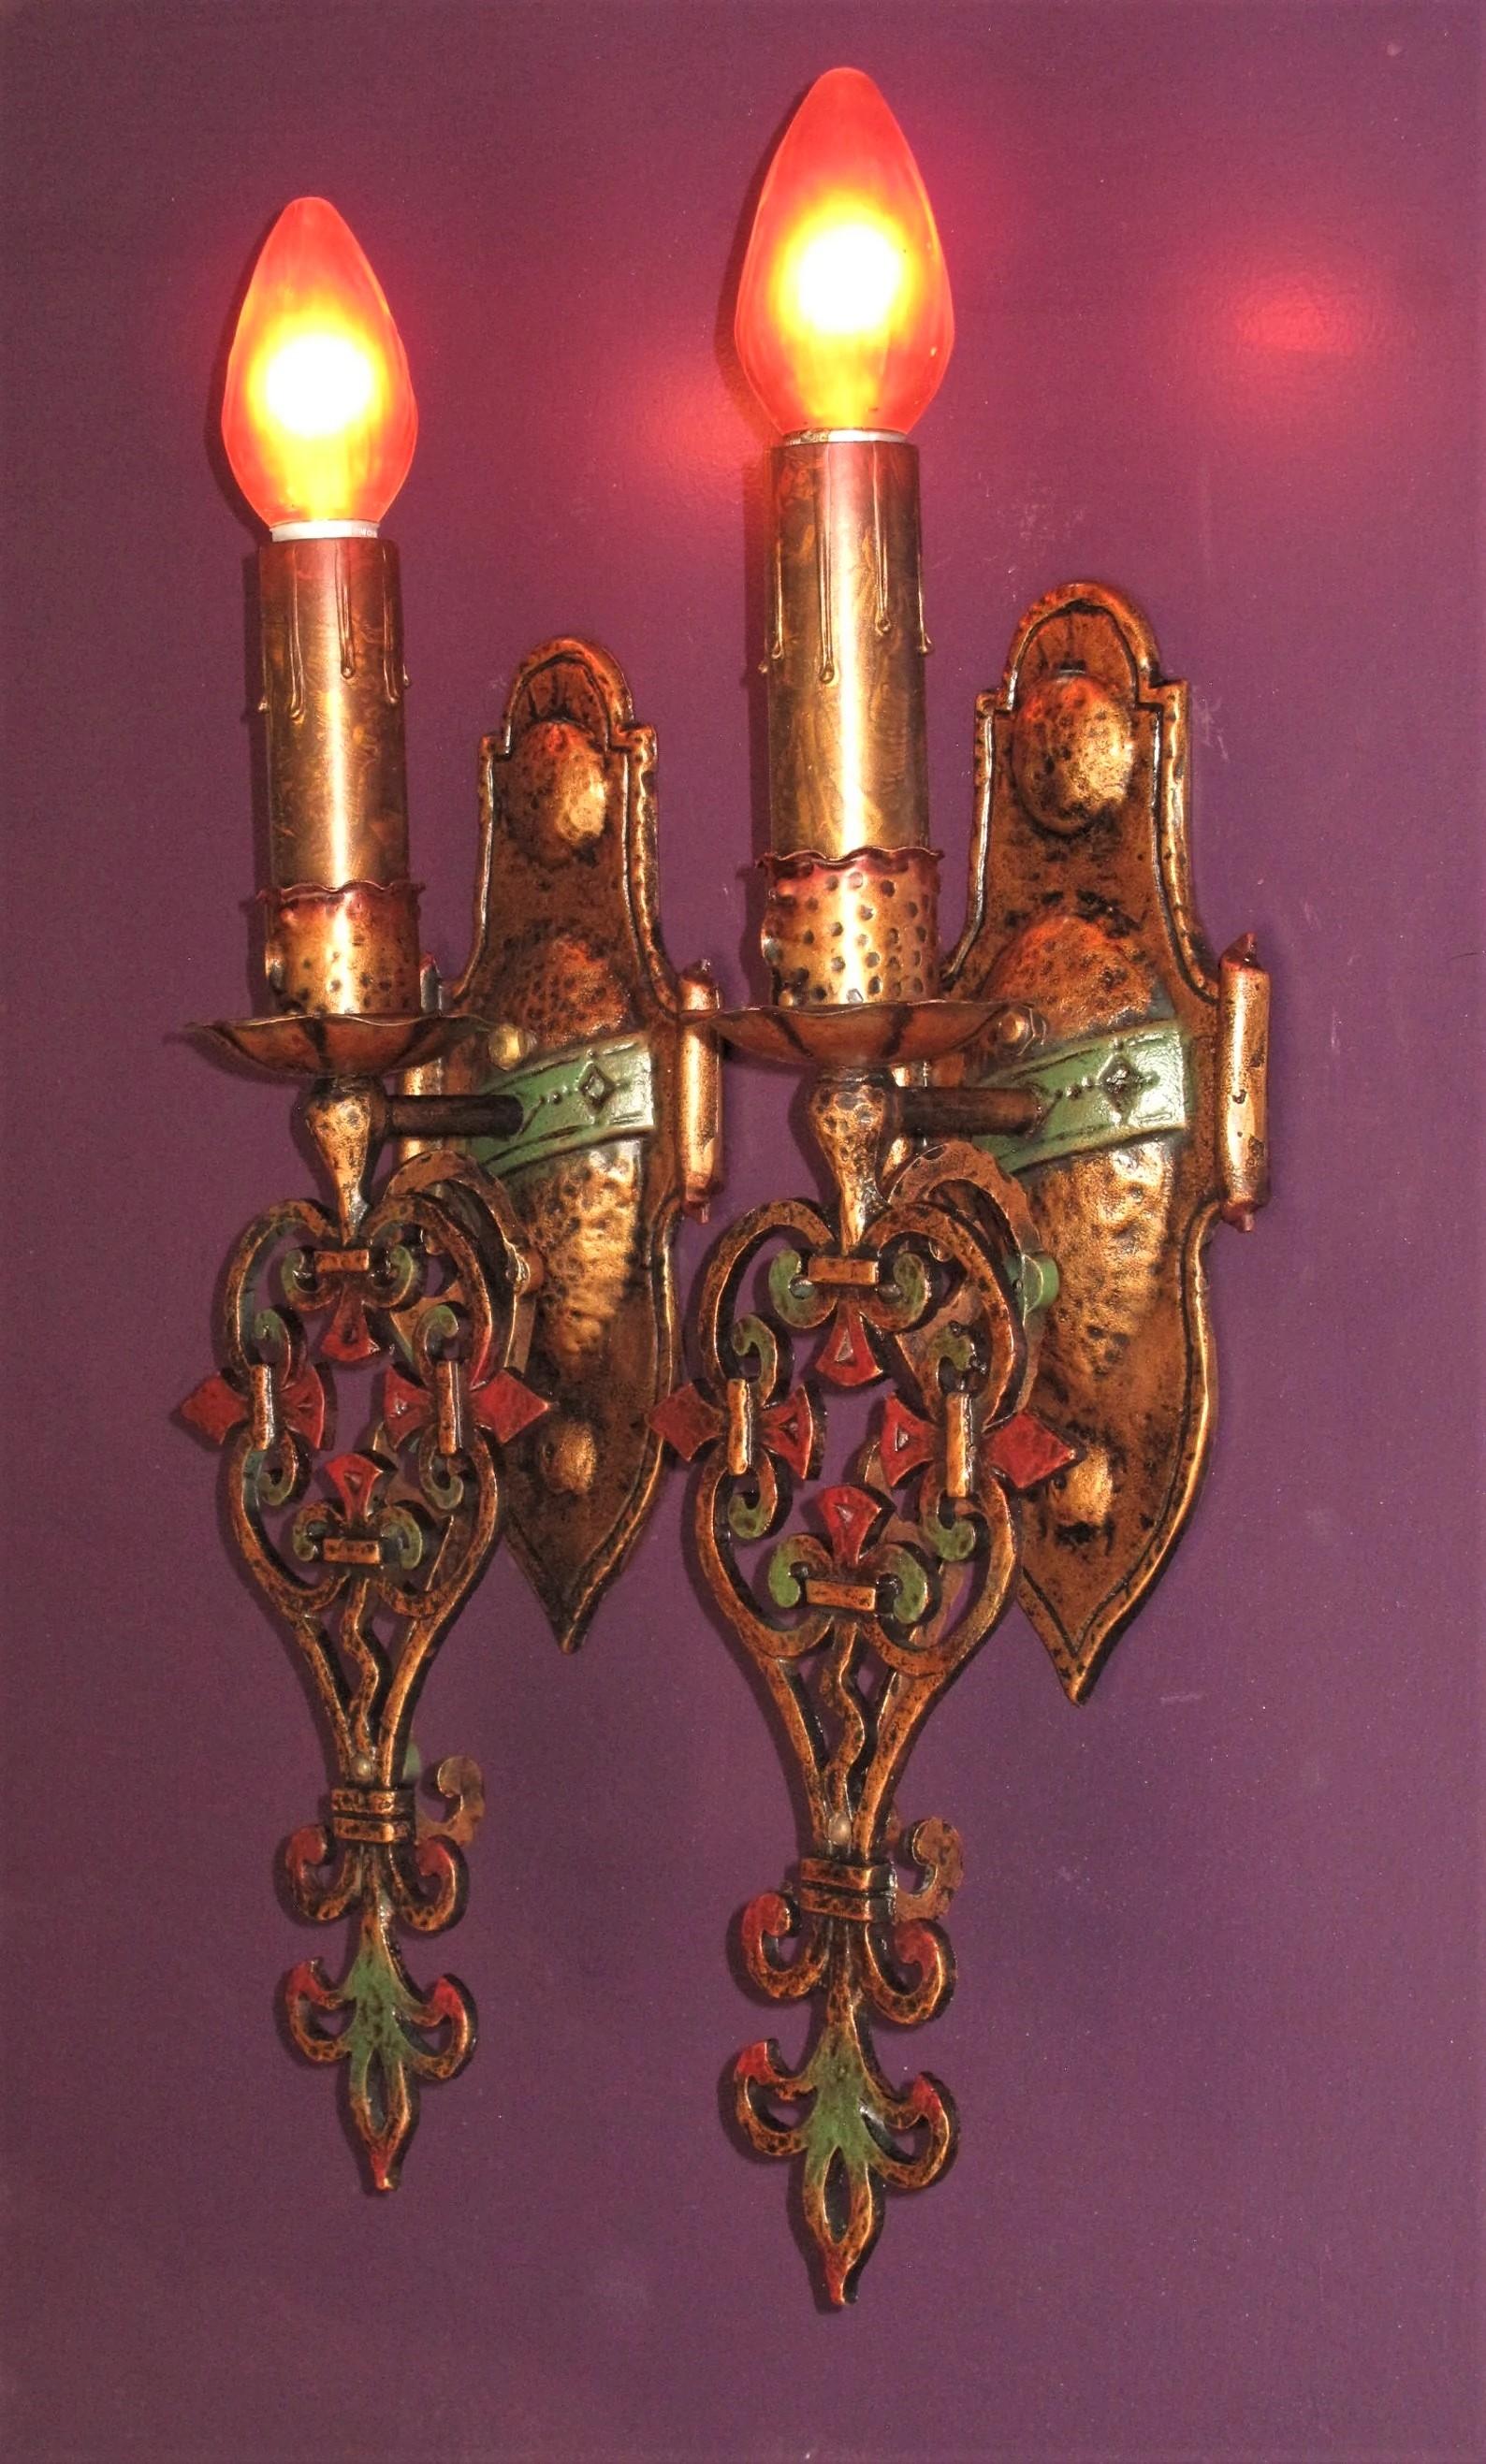 3 pair available, priced per pair.  Single at 1/2 pair price.
Large and impressive 1920s Spanish Revival sconces painstakingly restored to exactly match original finish by our in house artisan. Note the red accent on the top of the candle sleeves,